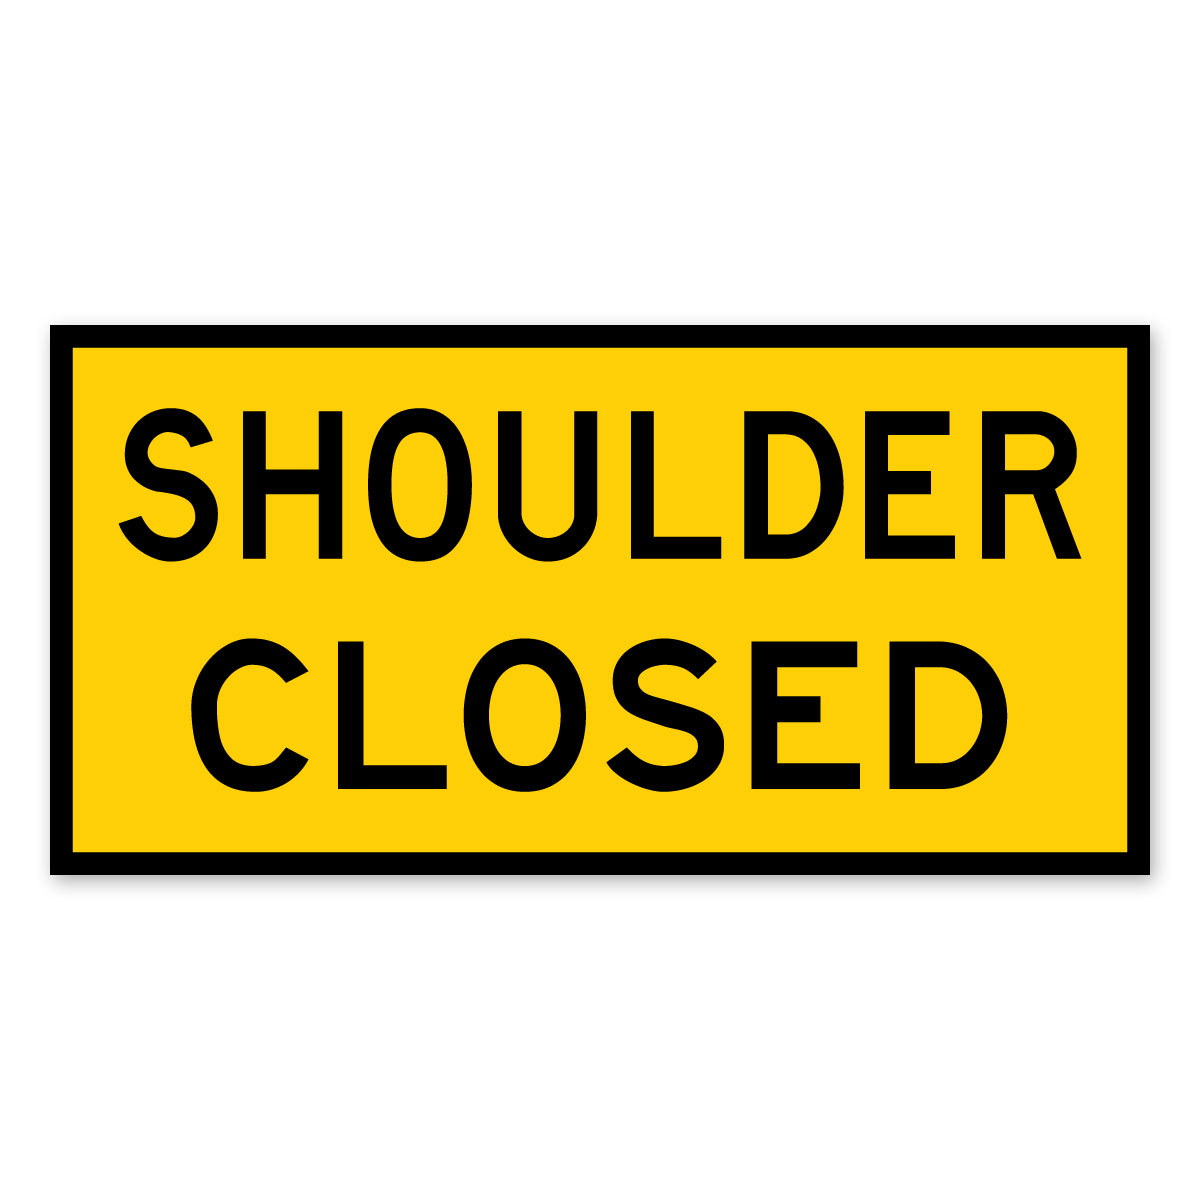  Boxed Edge Sign, T2-19A Shoulder Closed, Class 1 Reflective Steel, 1200mm (W) x 600mm (H)